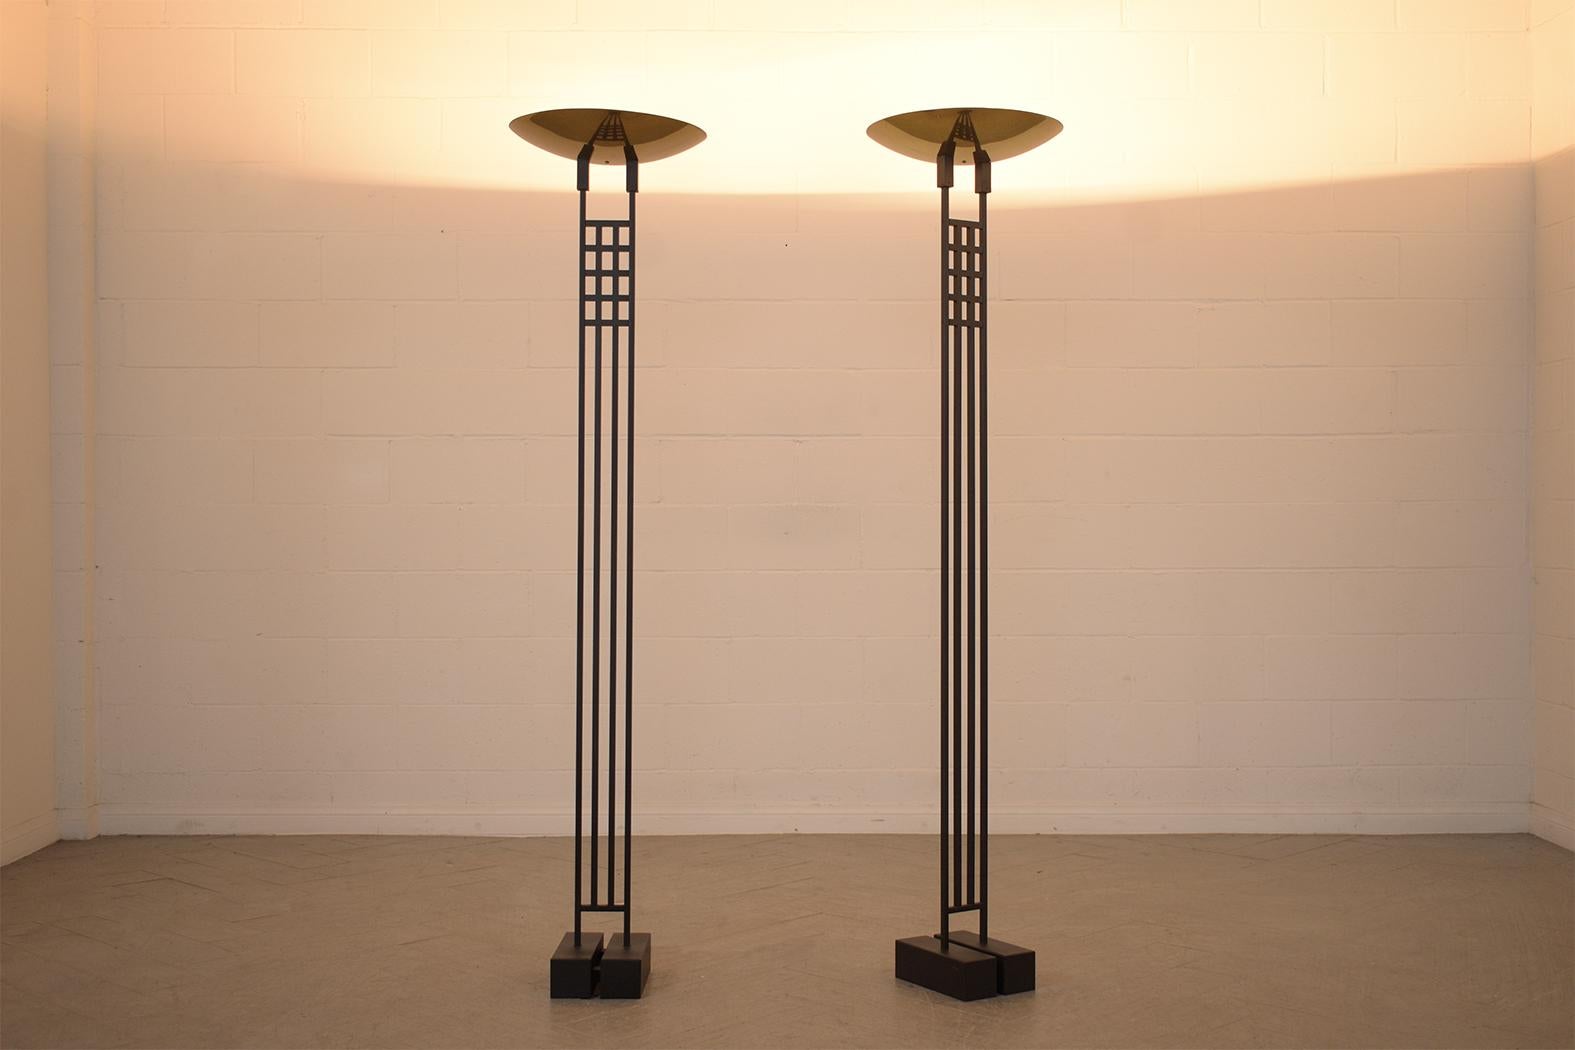 Lacquered 1980s Vintage Brass & Metal Floor Lamps: Restored Mid-Century Modern Design For Sale